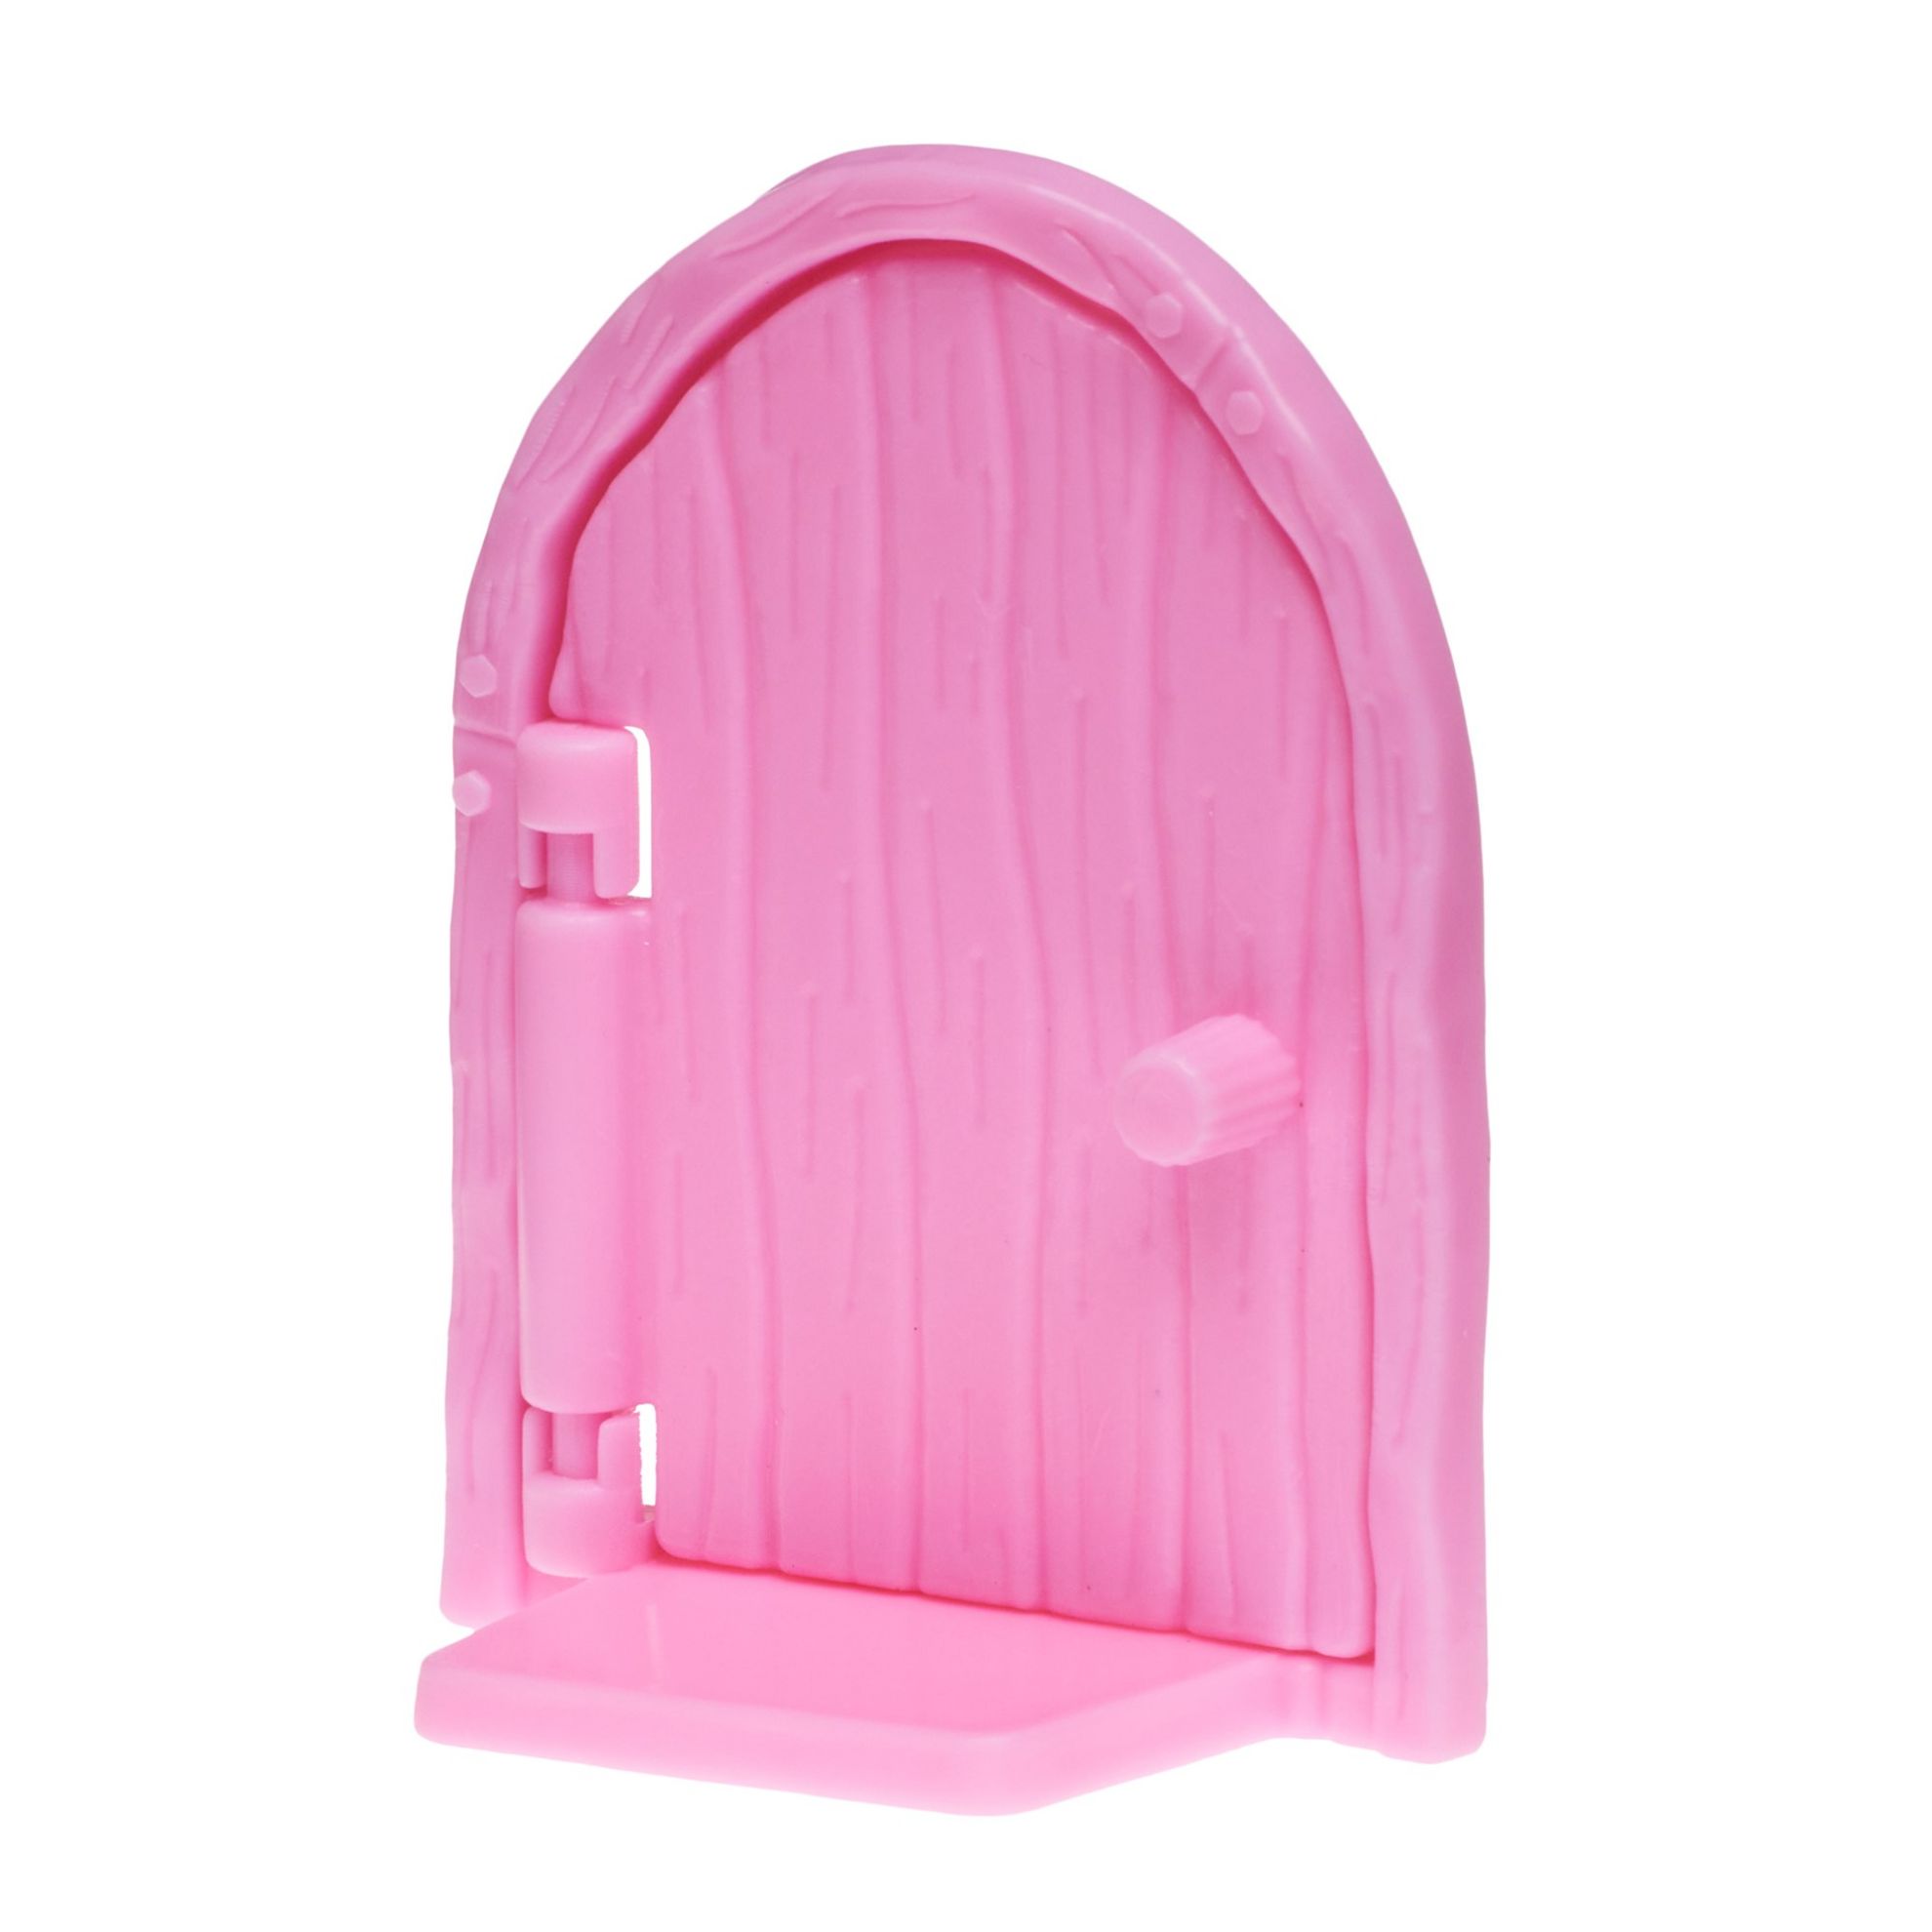 Spare Parts - Mouse in the House 5 Figure Pack - Pink Door